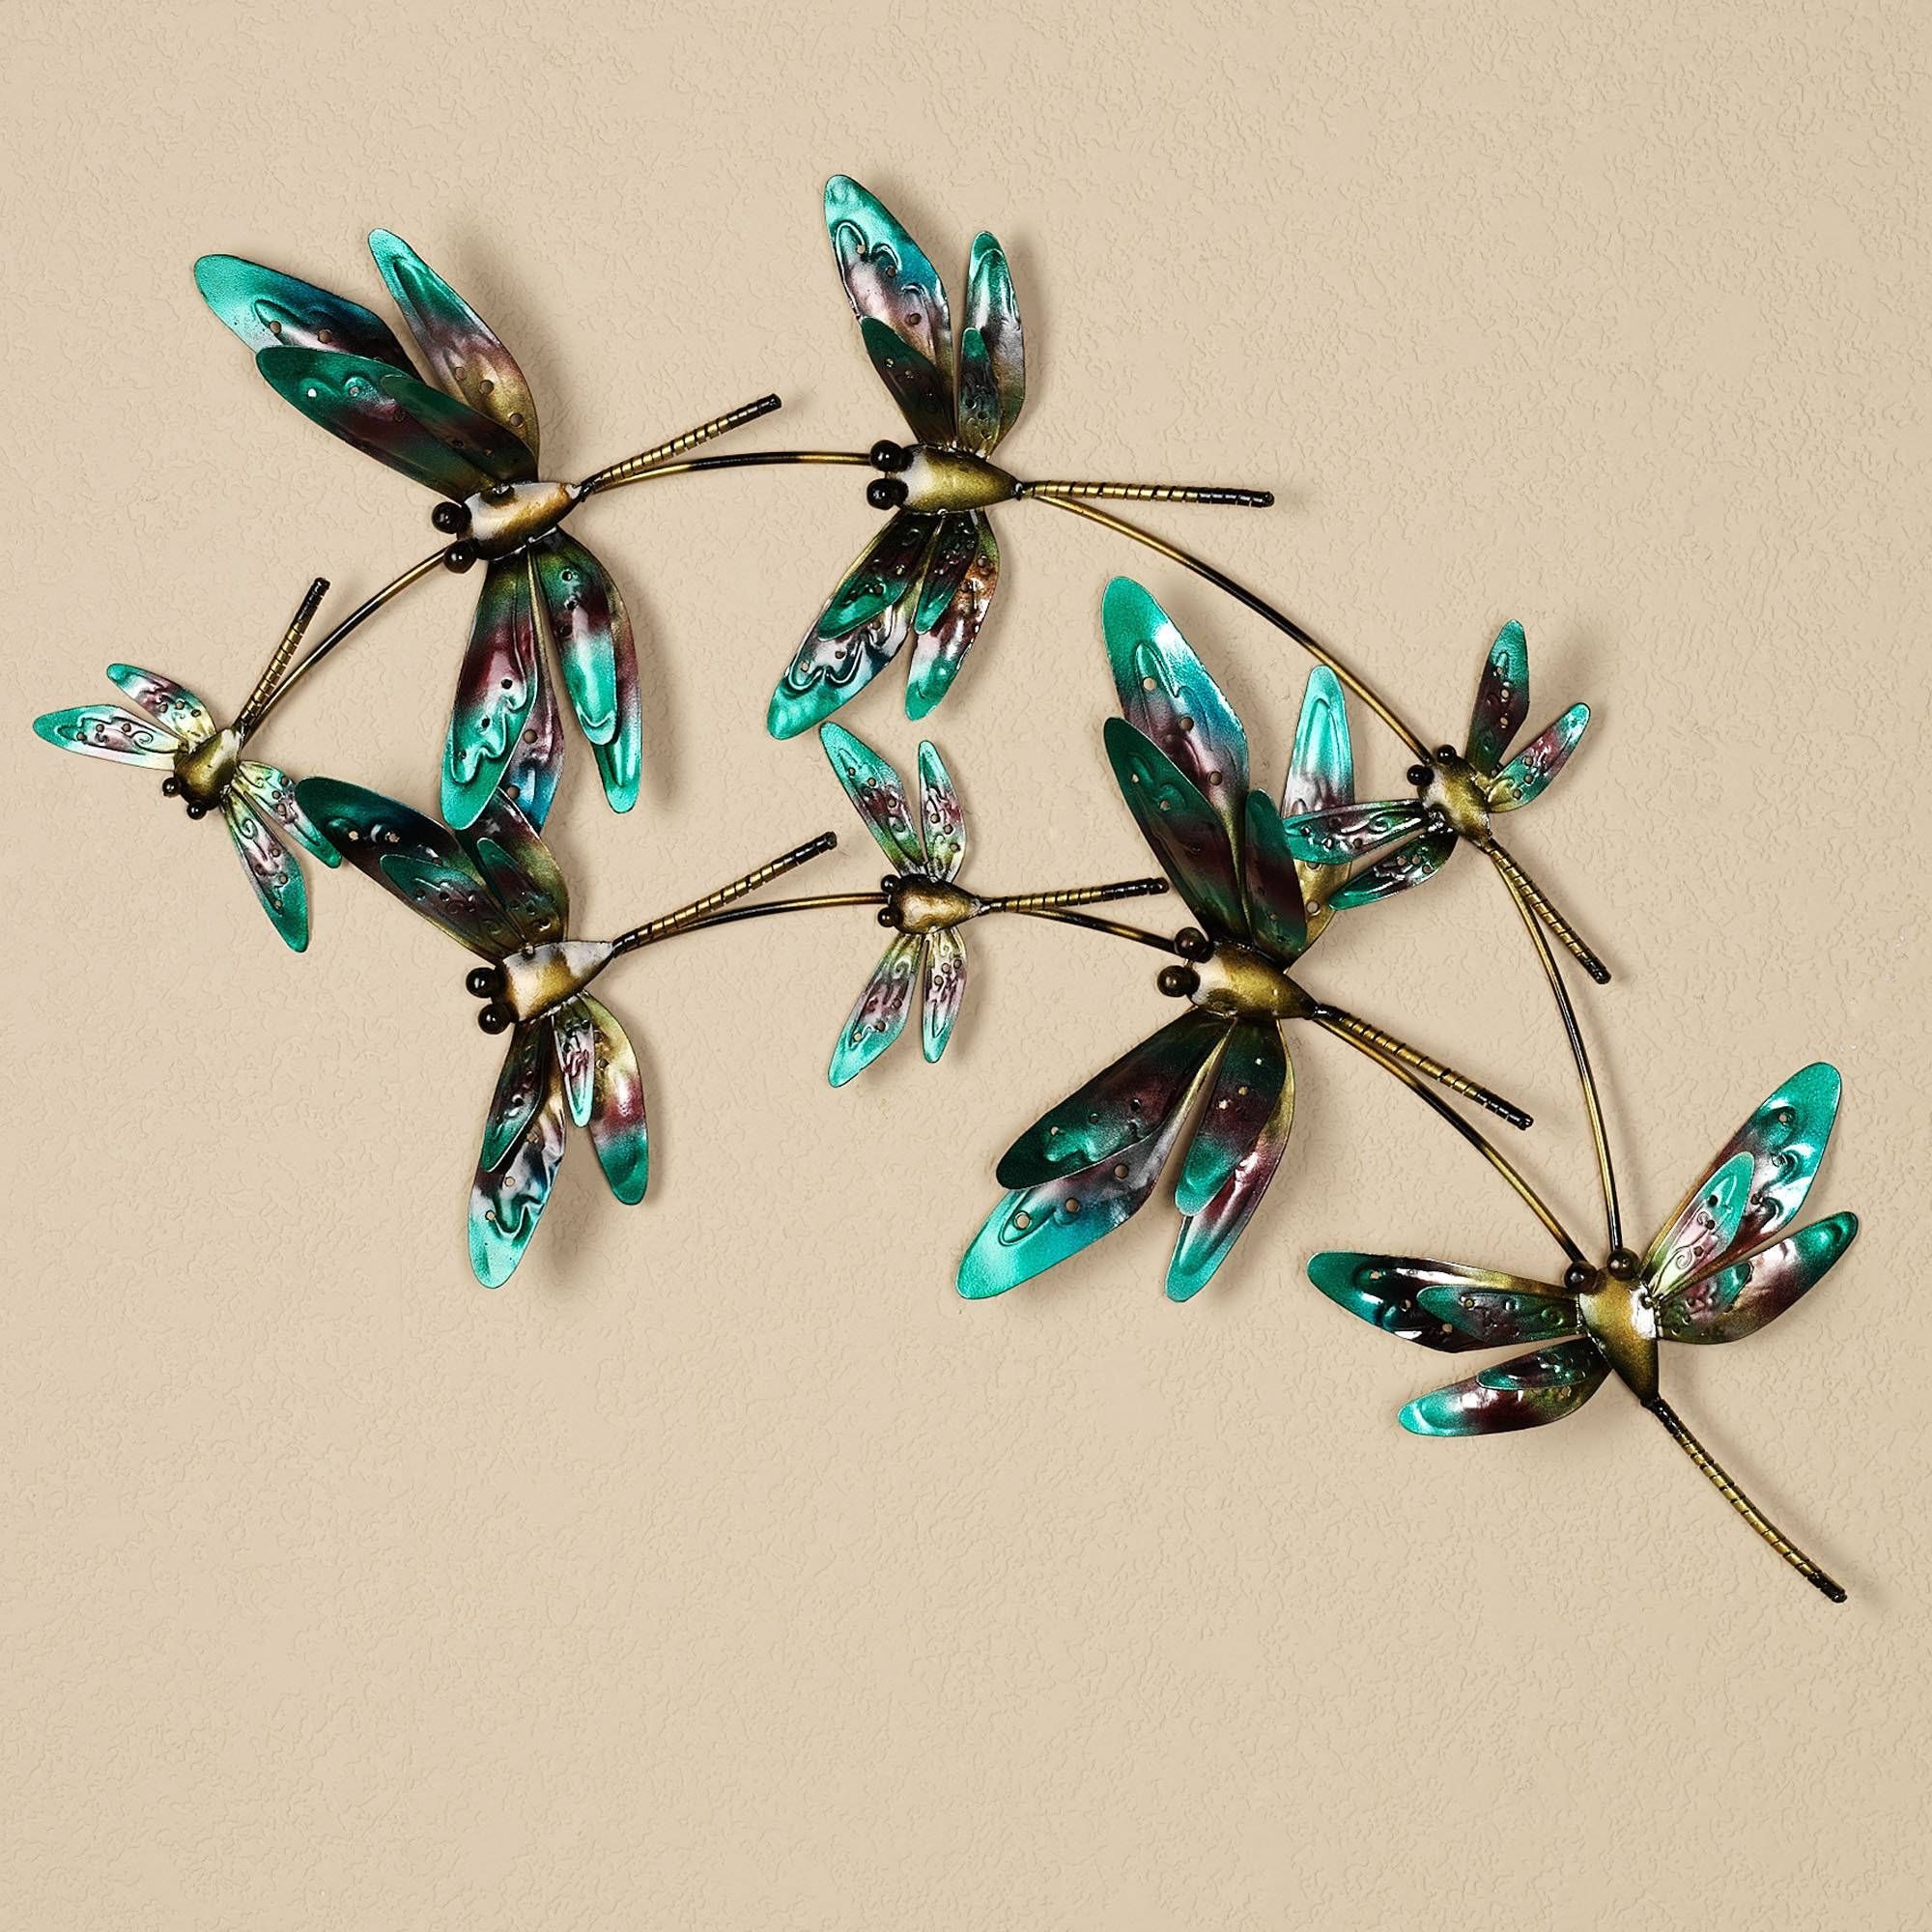 Metal Dragonfly Wall Decor : Dragonfly Wall Decor Bedroom – Design Throughout Latest Dragonfly 3d Wall Art (View 4 of 20)